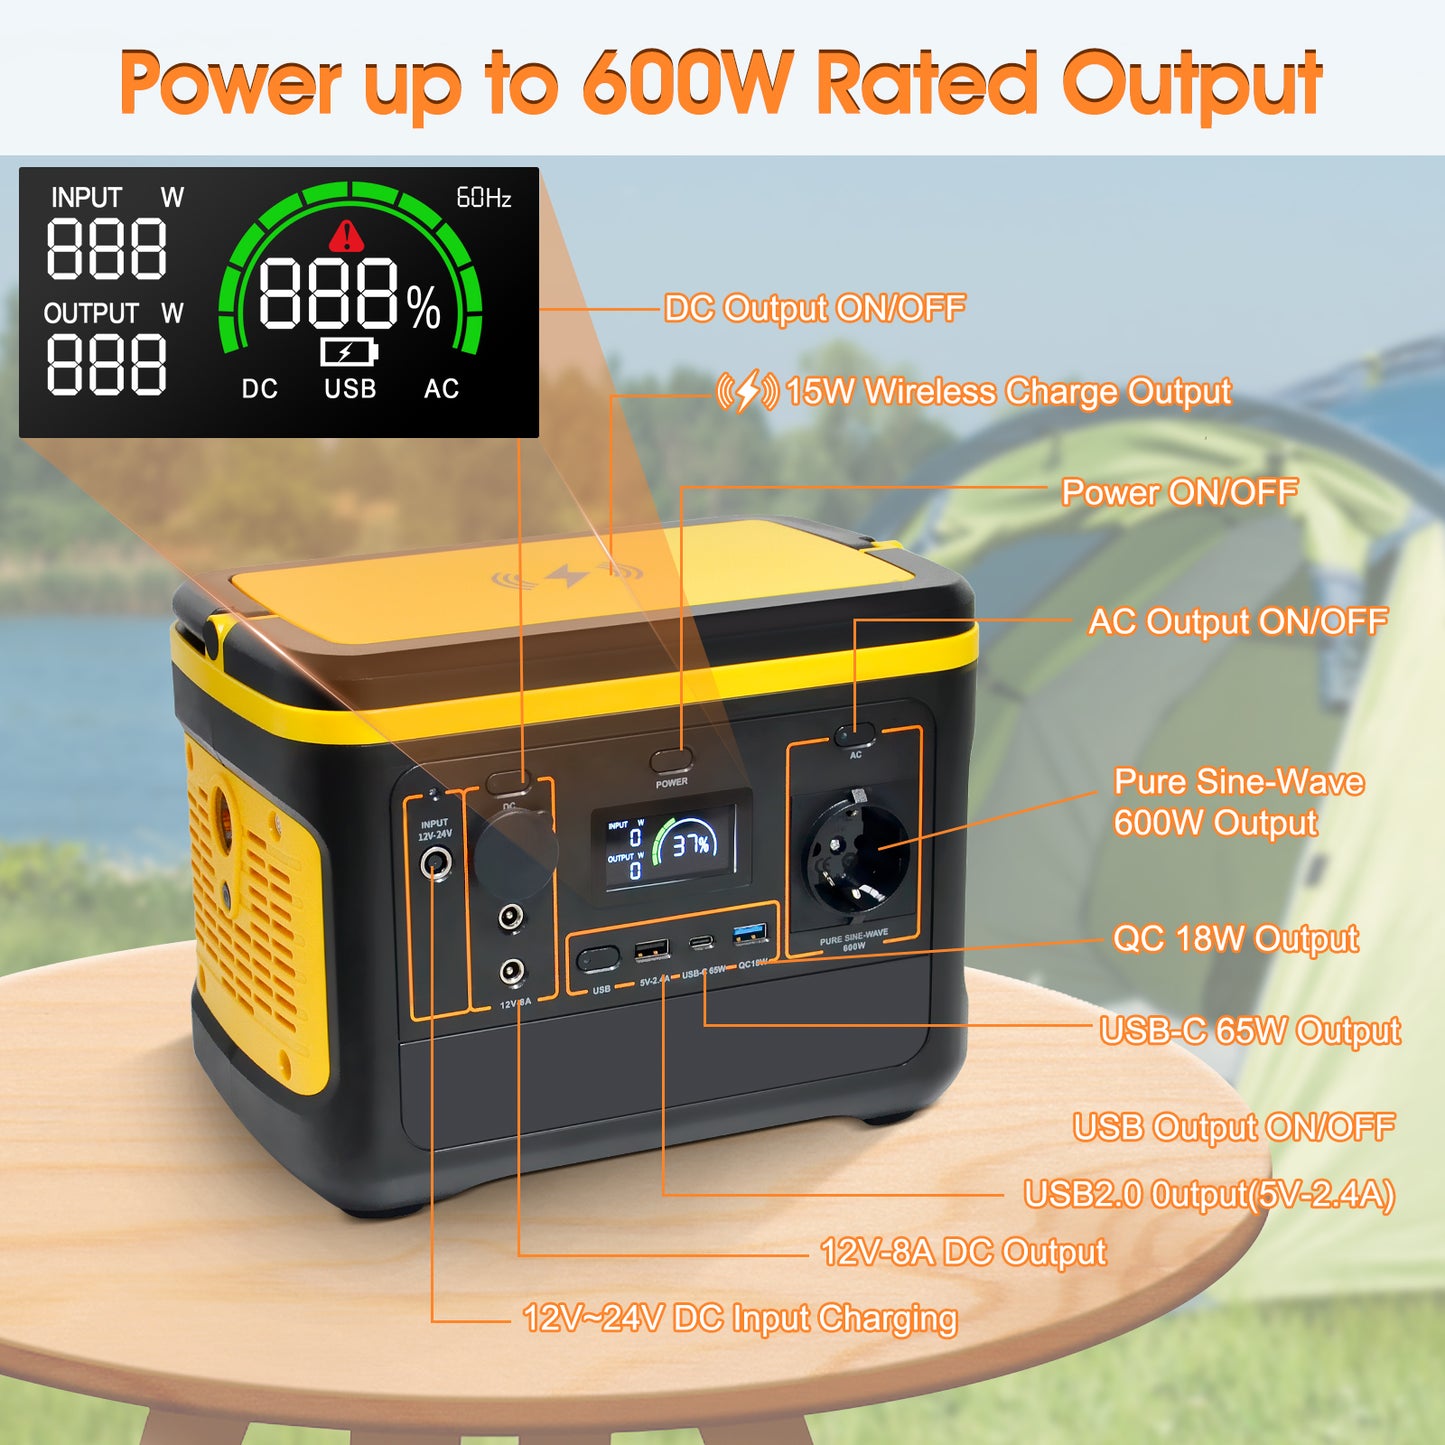 BEMETER Portable Power Station Explorer, 568Wh Backup Lithium Battery, 600W Solar Generator for Outdoors Camping Travel Hunting Blackout